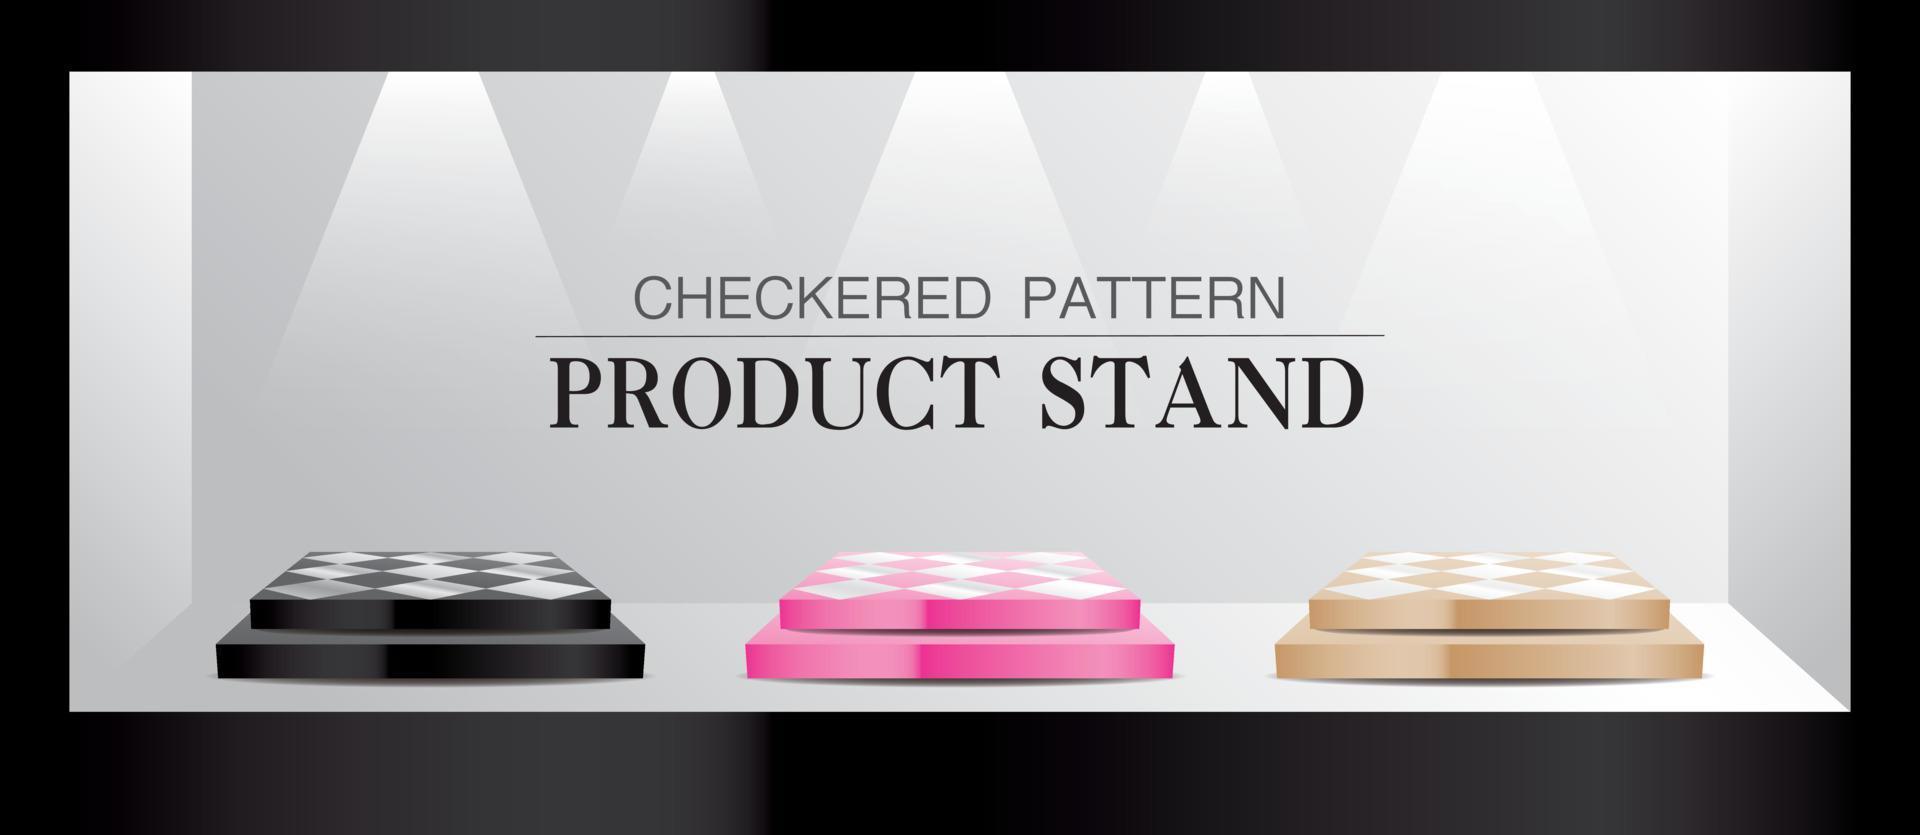 Luxury checkered pattern product stage 3D illustration vector. vector